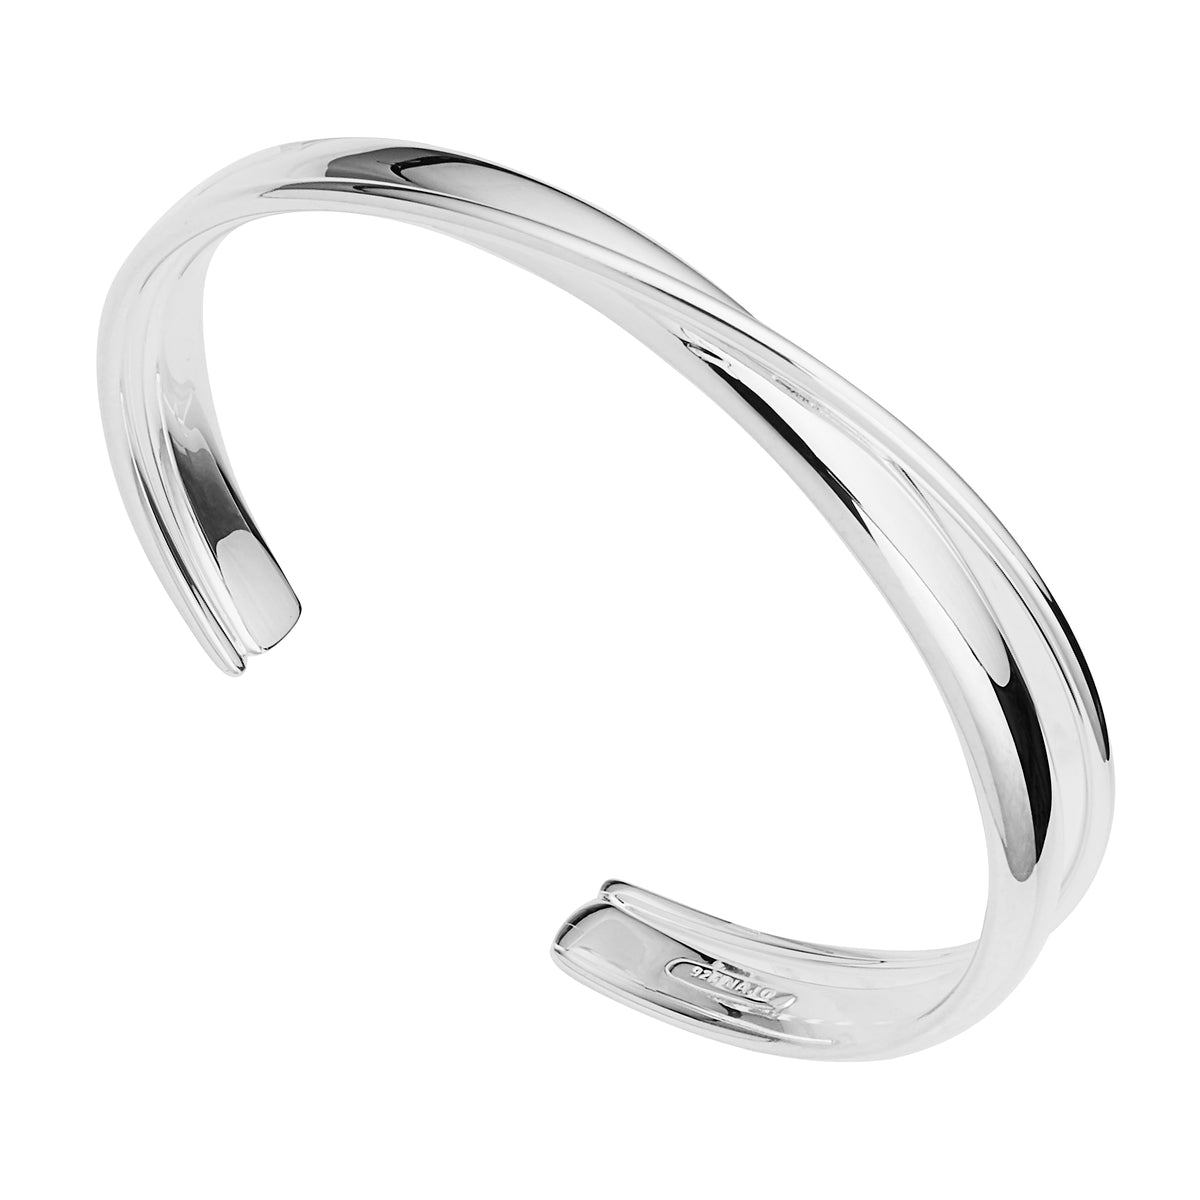 Sterling silver, wide silver cuff made from overlapping hollow tubes